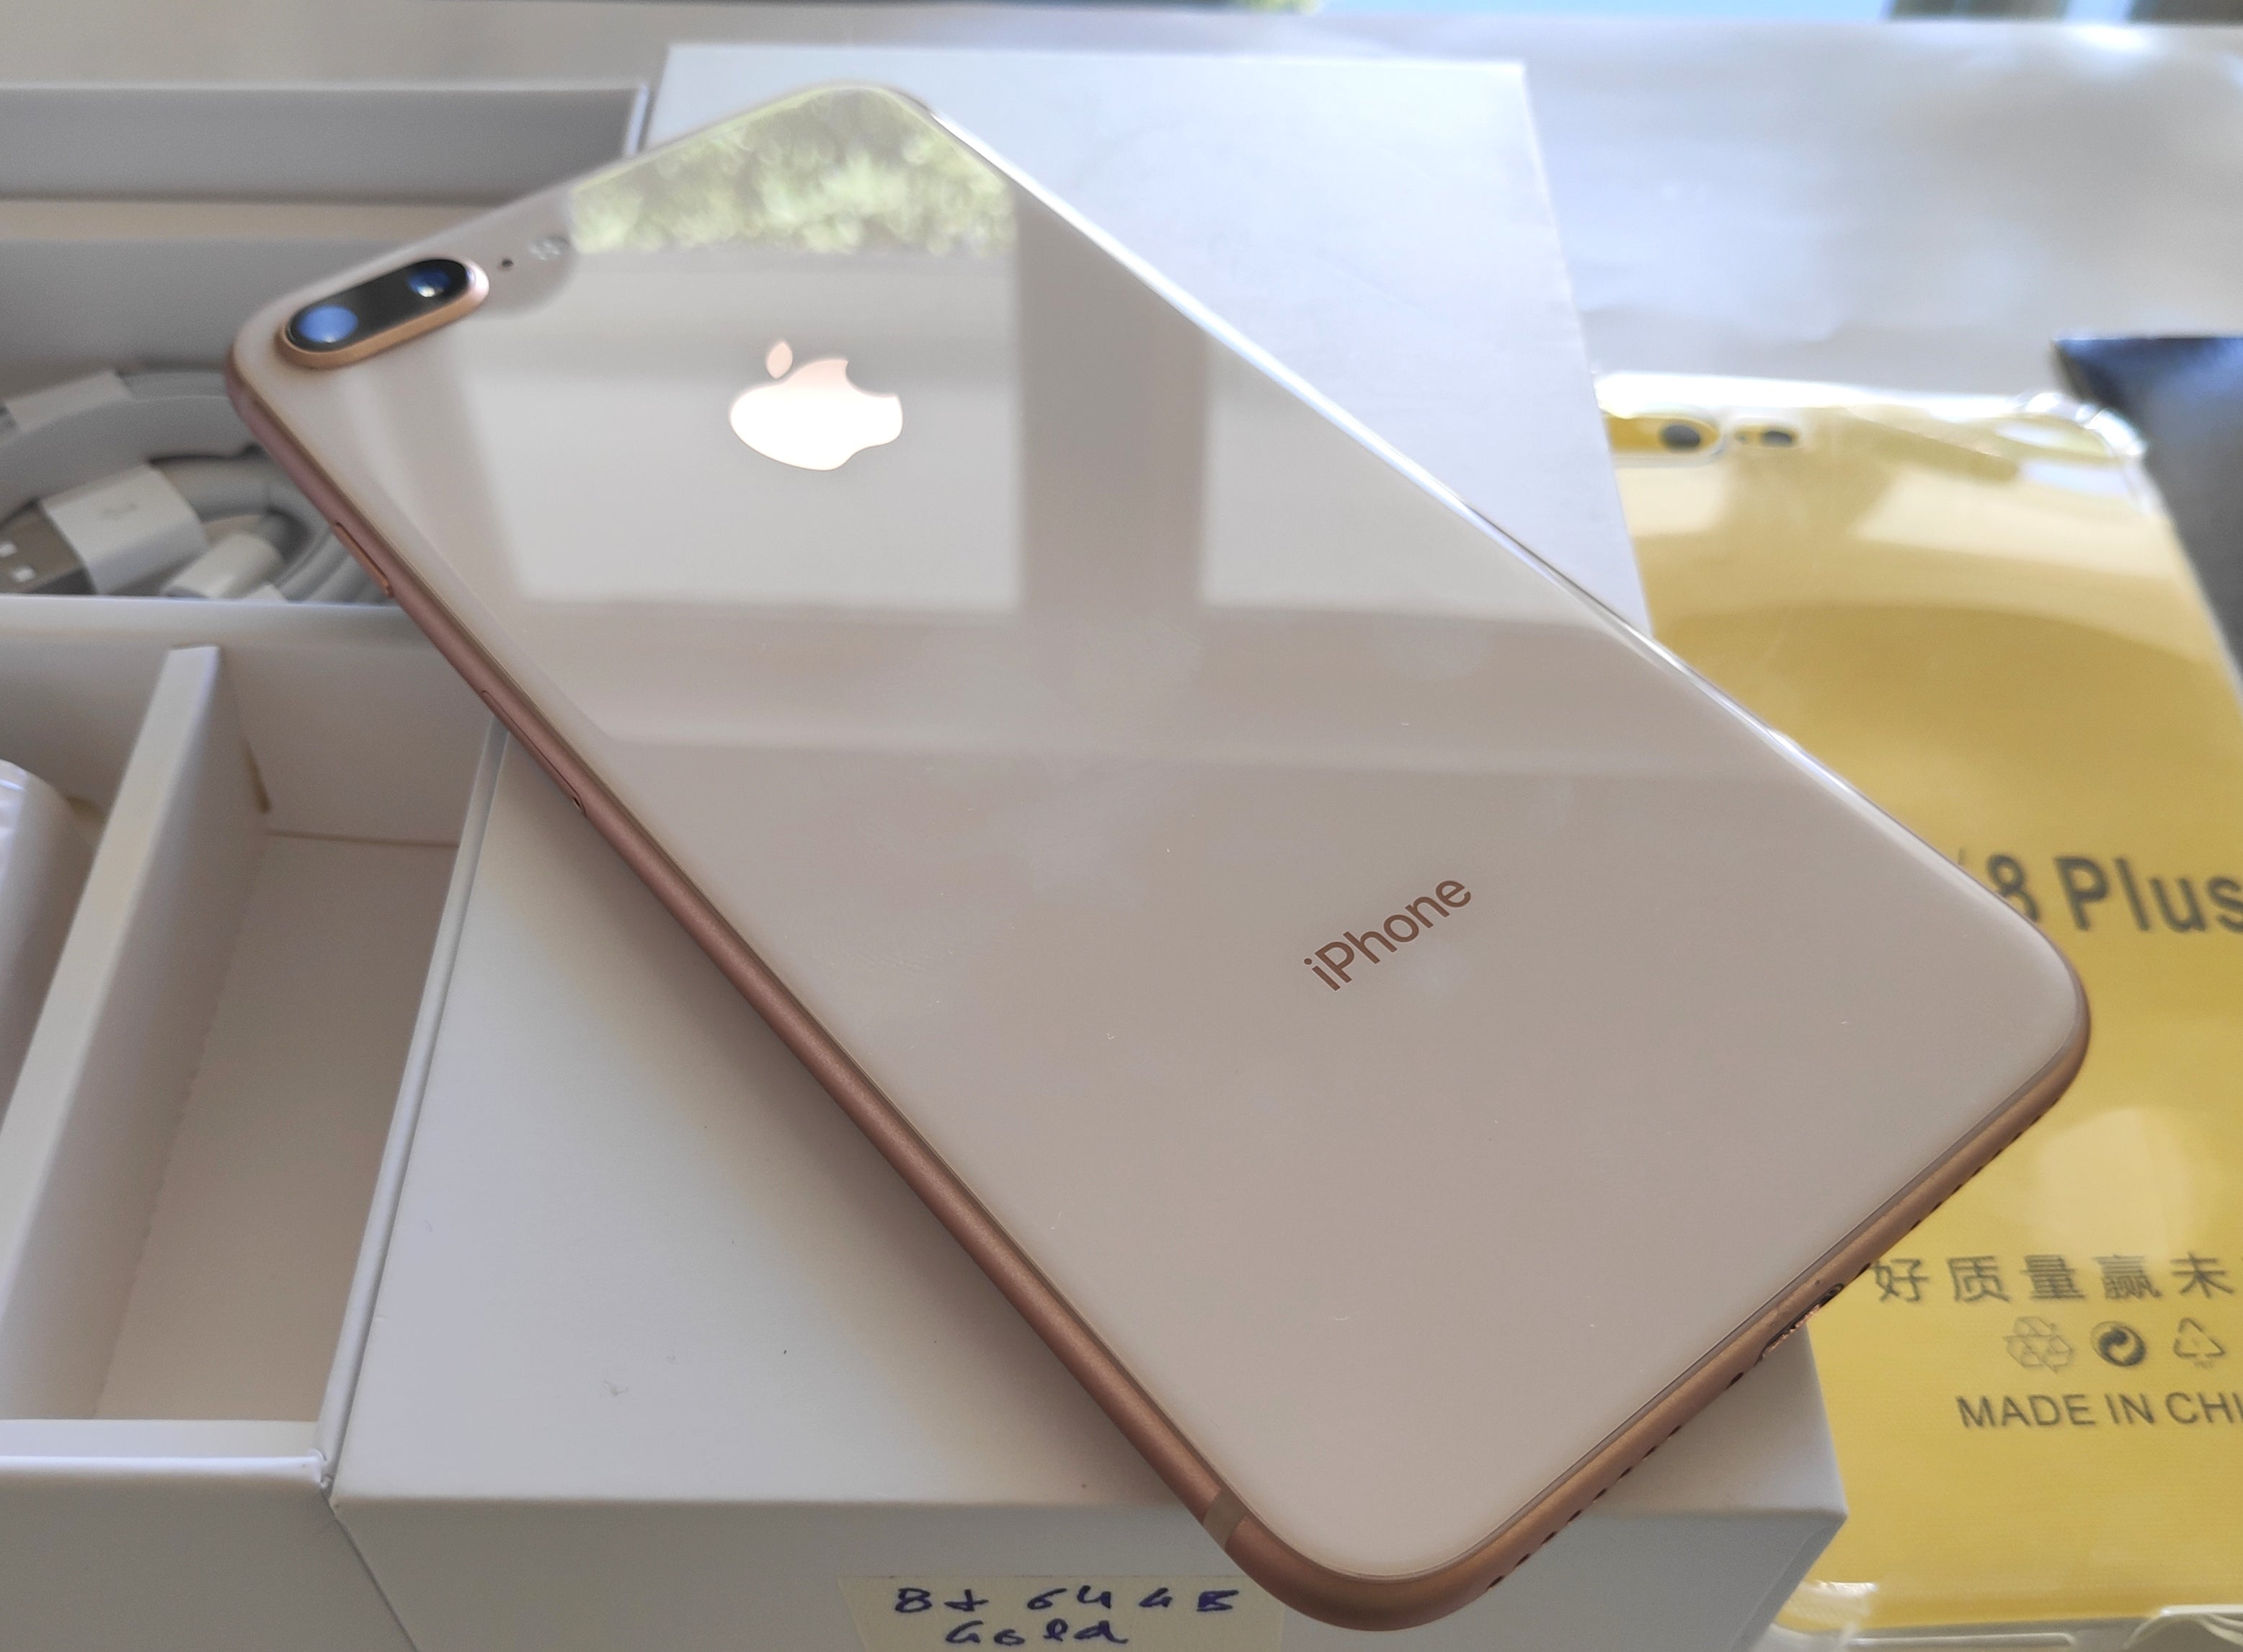 Apple iPhone 8 Plus 64GB Gold New Case, Screen Protector & Shipping (As New)